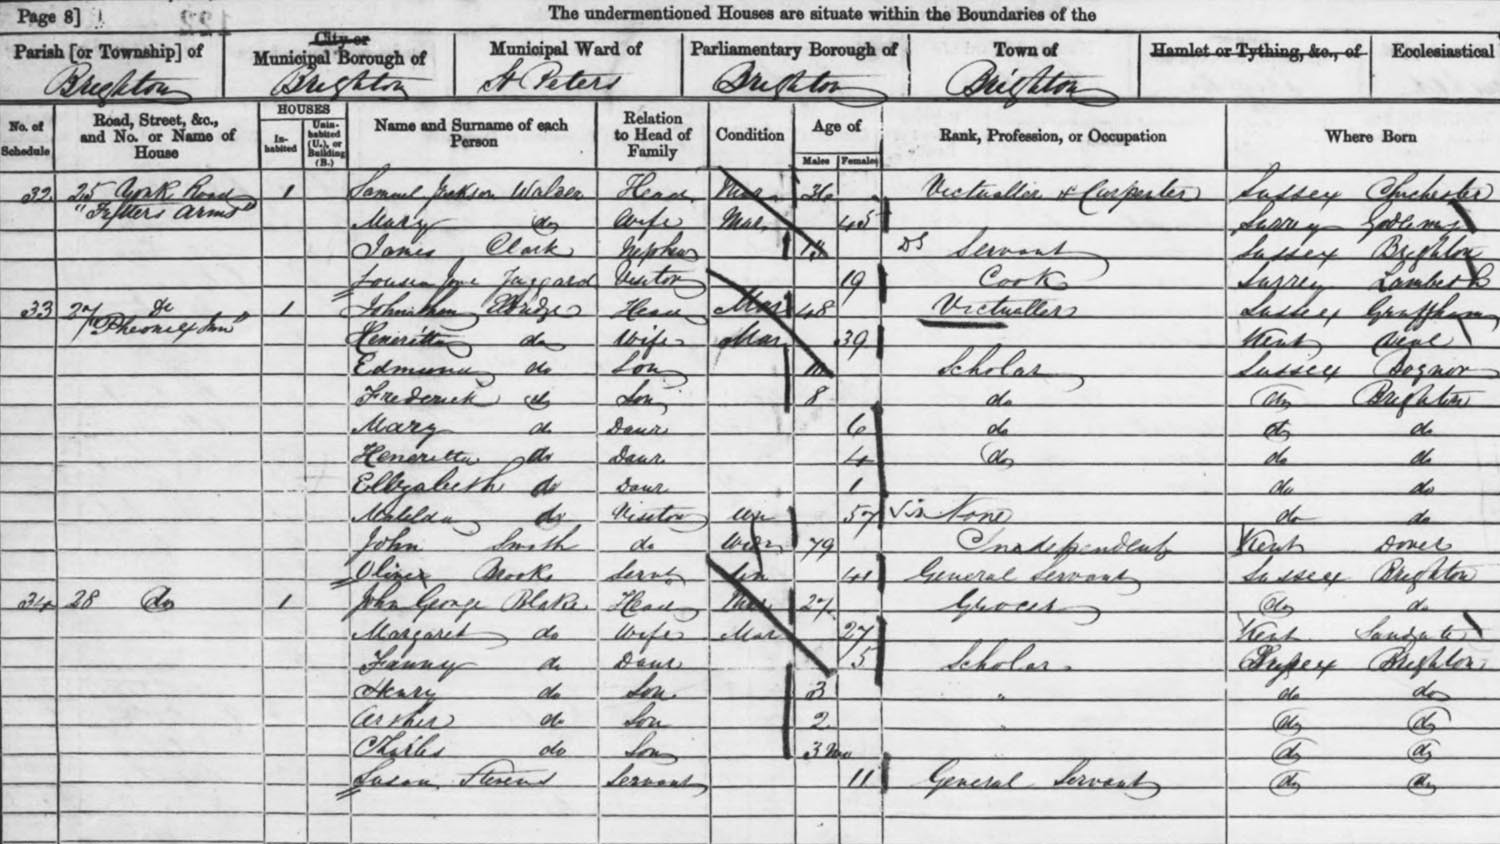 Image of detail of the 1861 census of Brighton & Hove